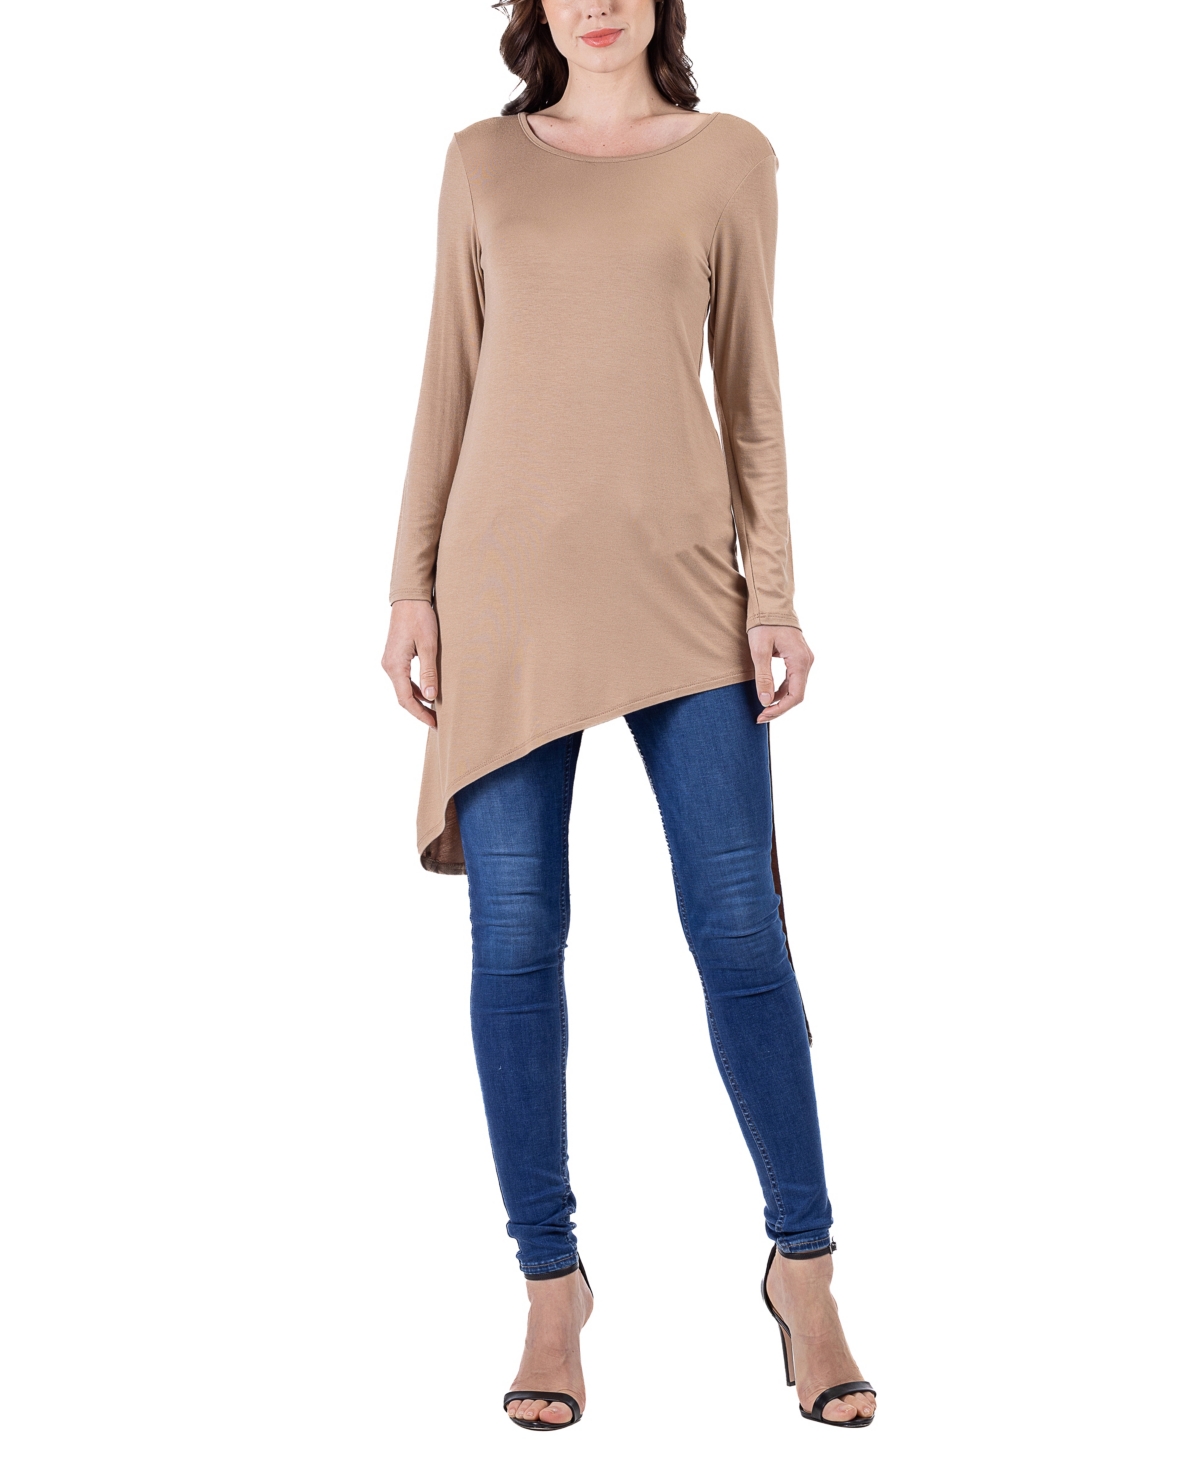 24seven Comfort Apparel Women's Long Sleeve Knee Length Tunic Top In Taupe